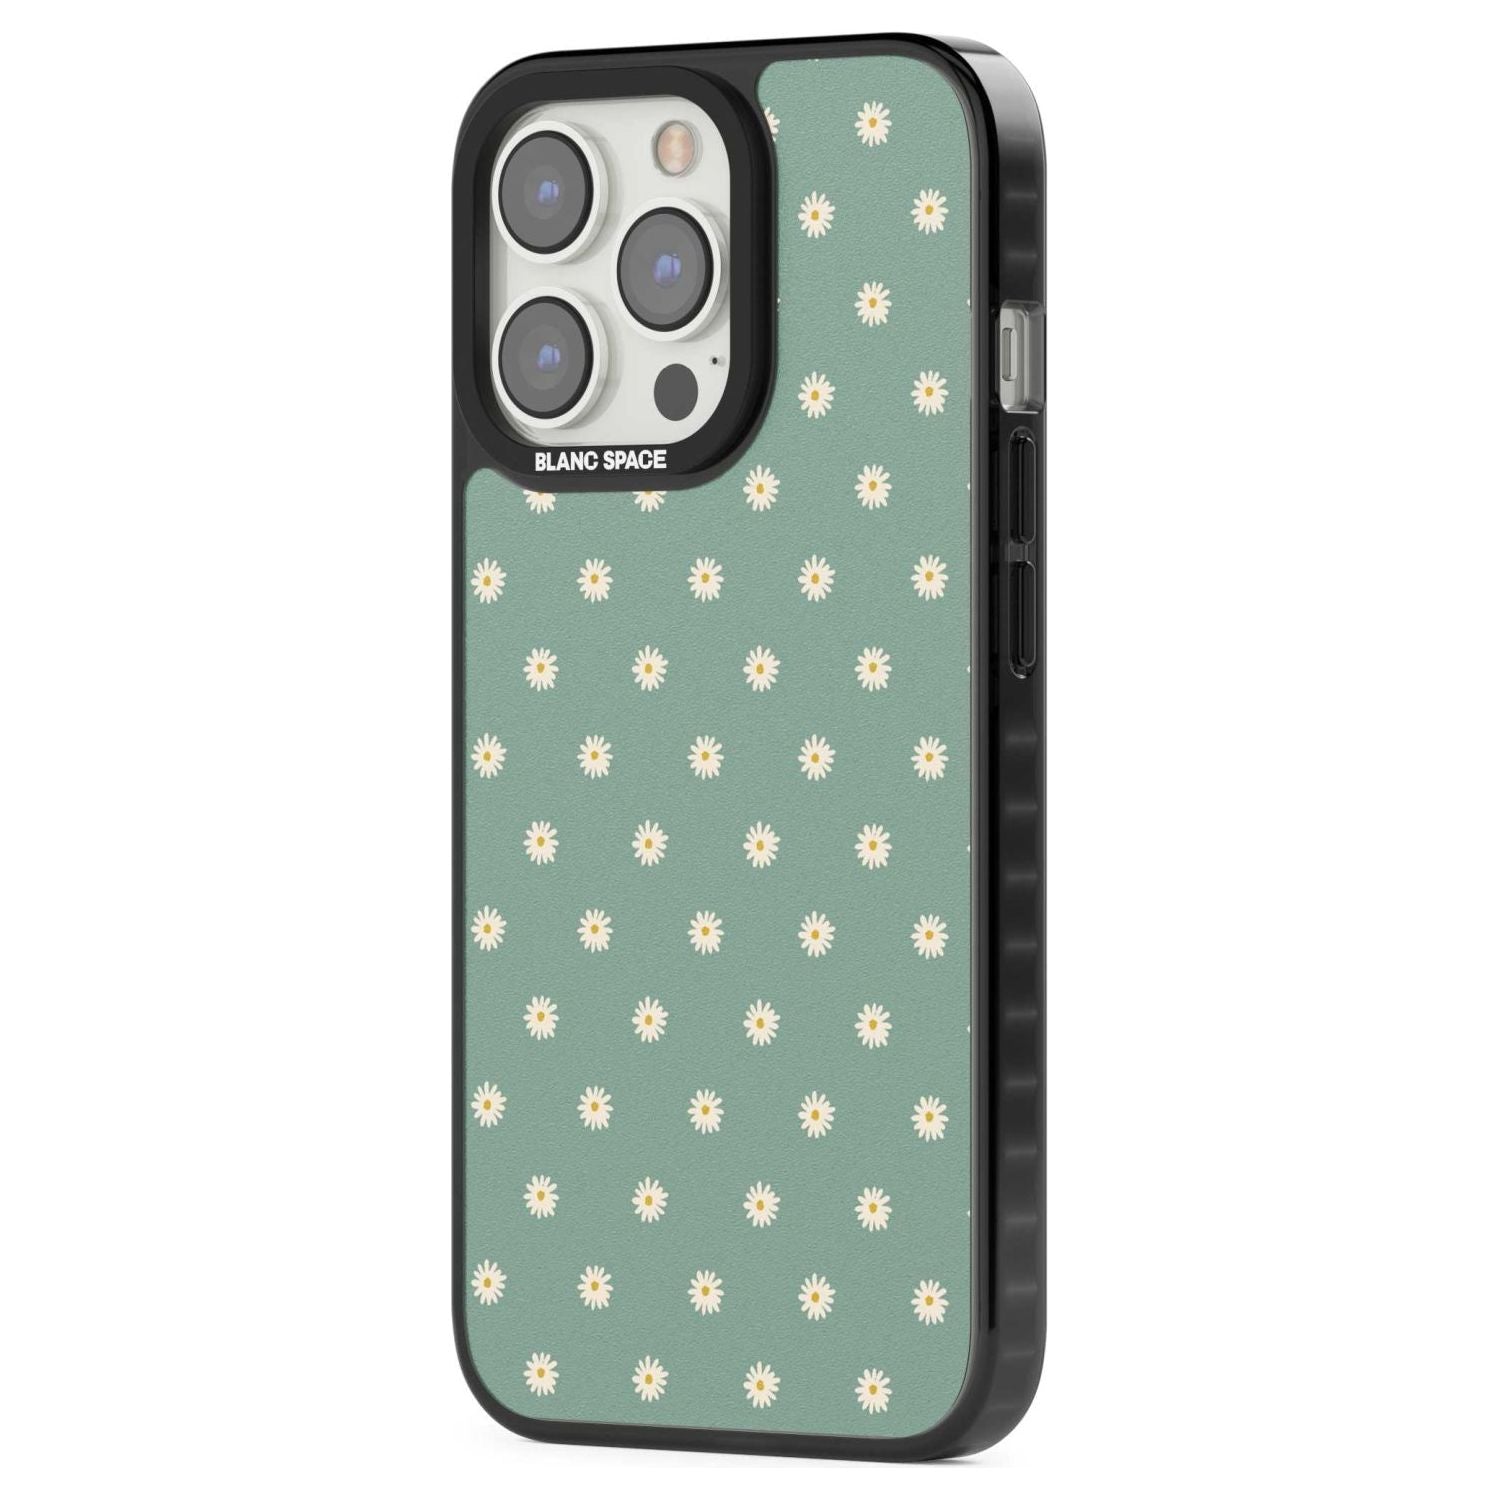 Daisy Pattern Teal Cute Floral